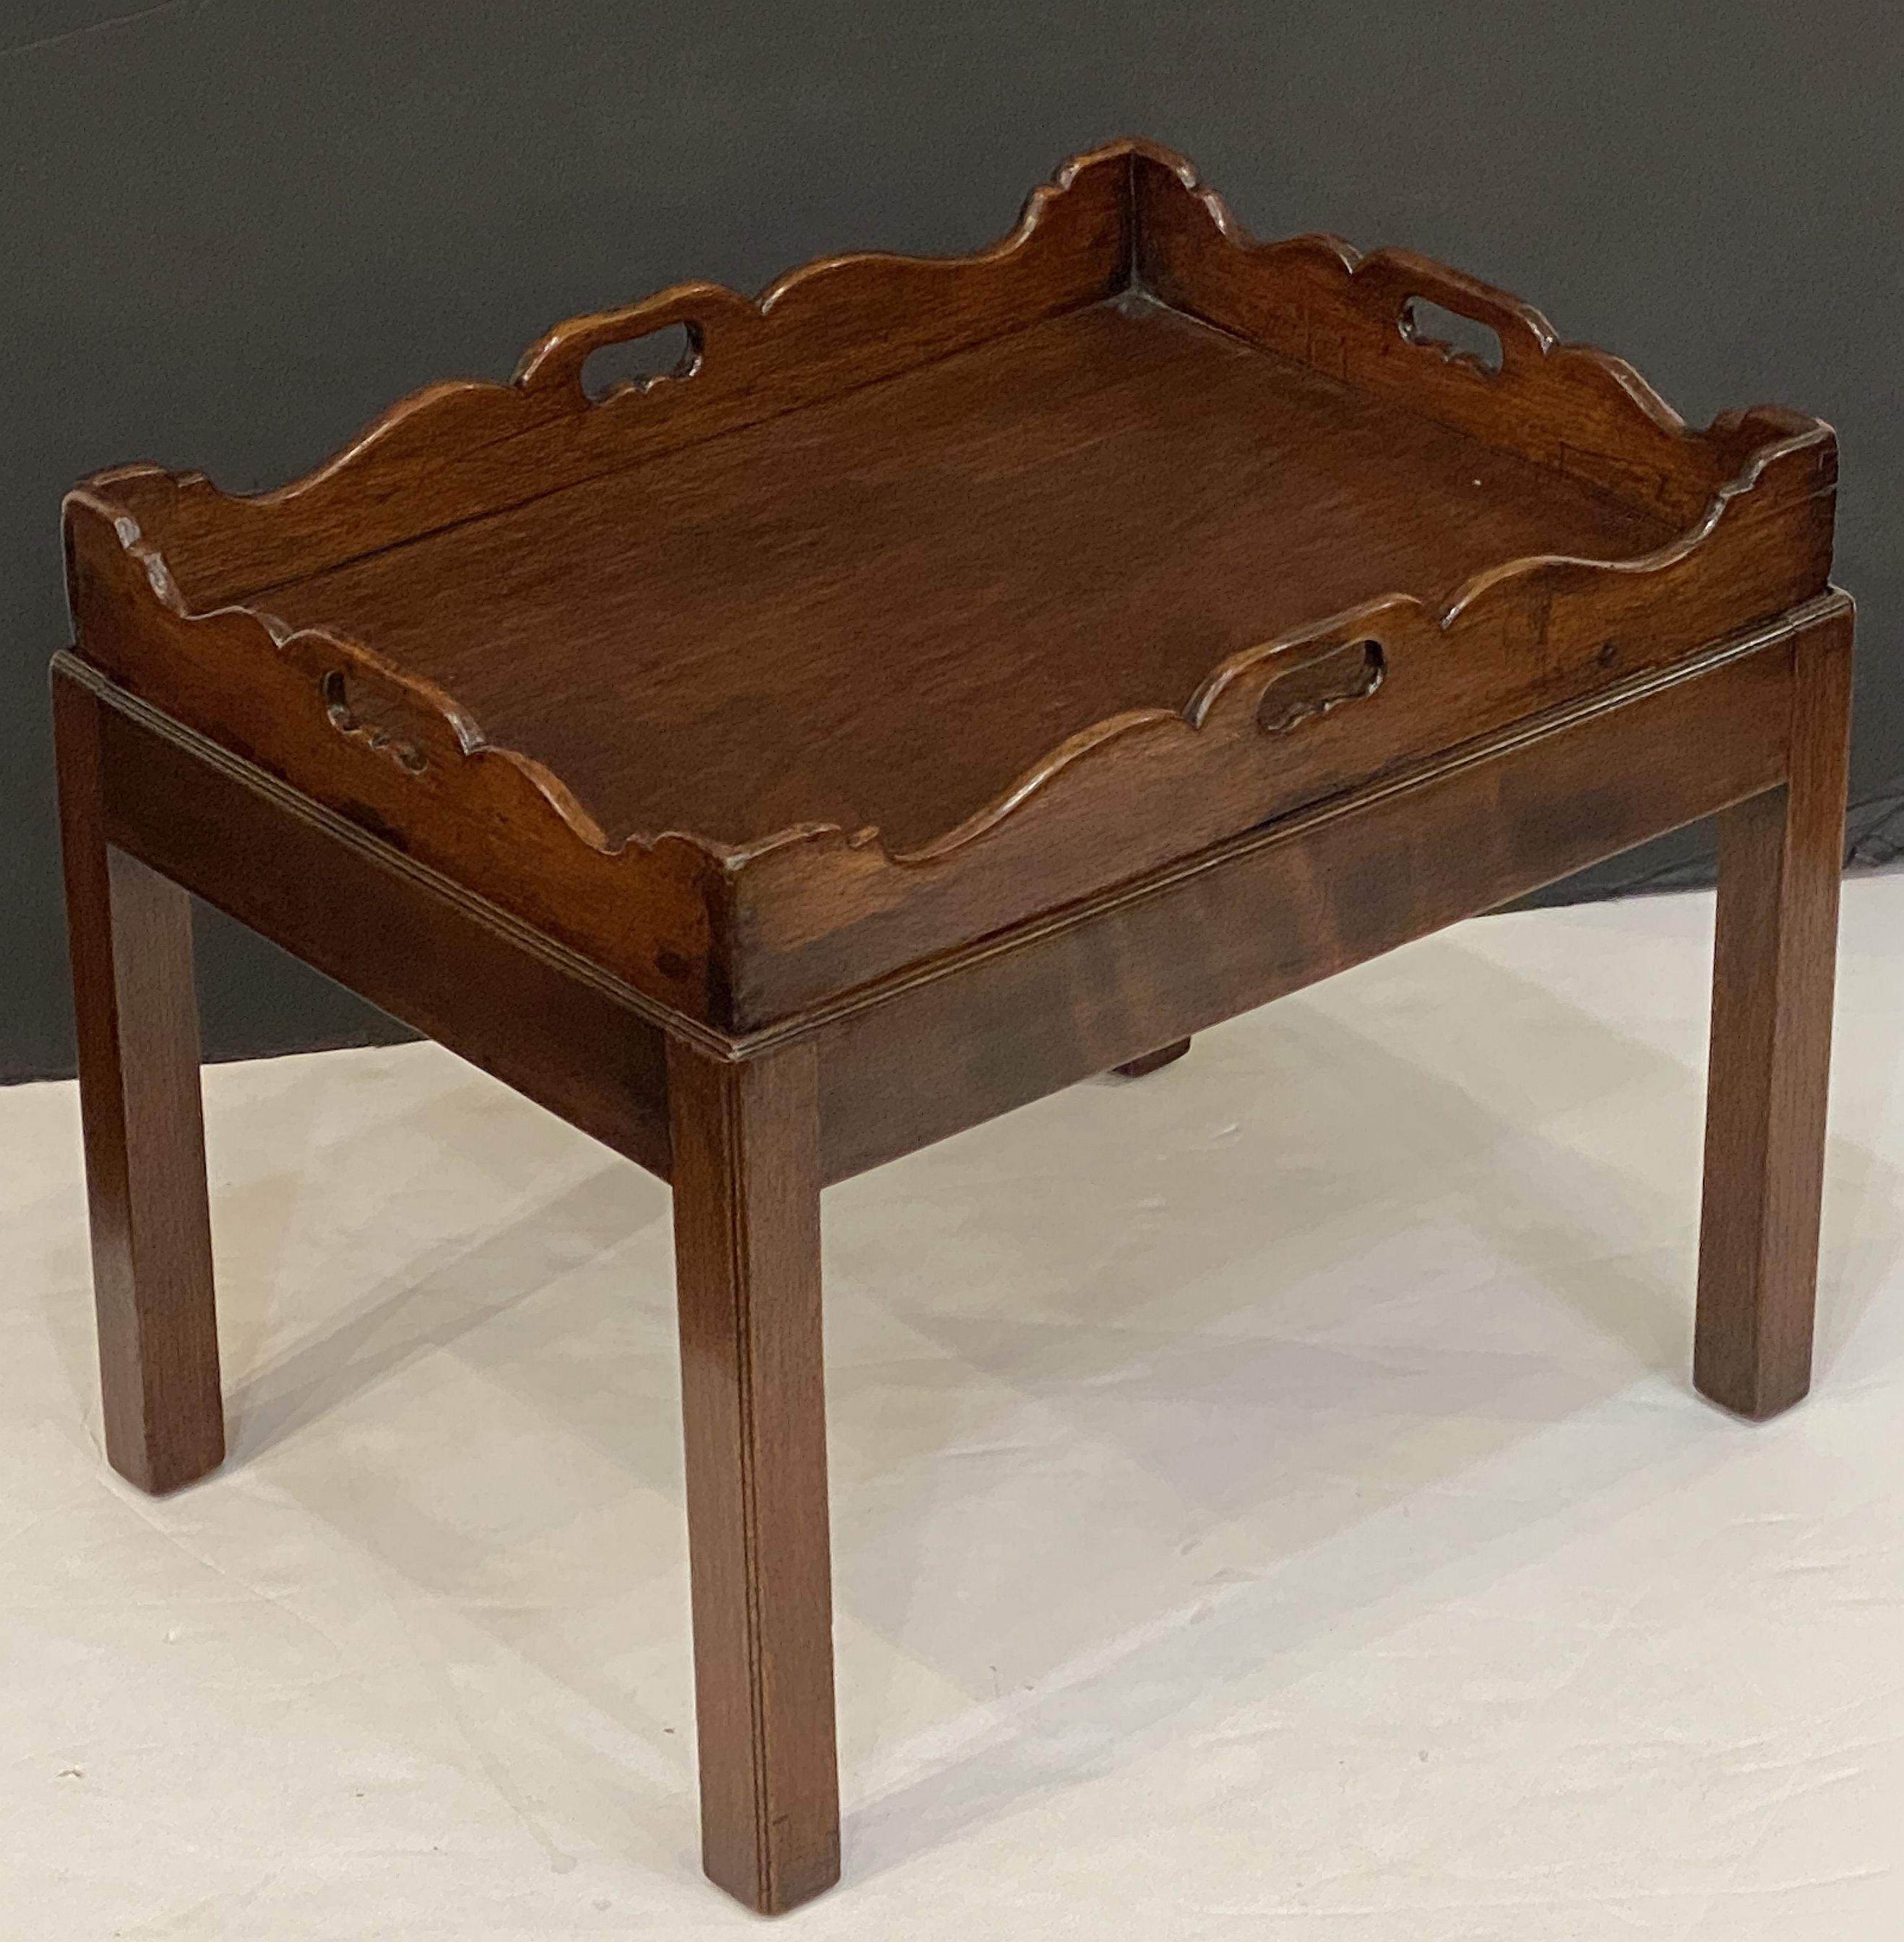 A handsome English end table or side table of oak, each featuring a removable serving or butler's tray, with a fitted stretcher base.

Great for display next to upholstered furniture!

